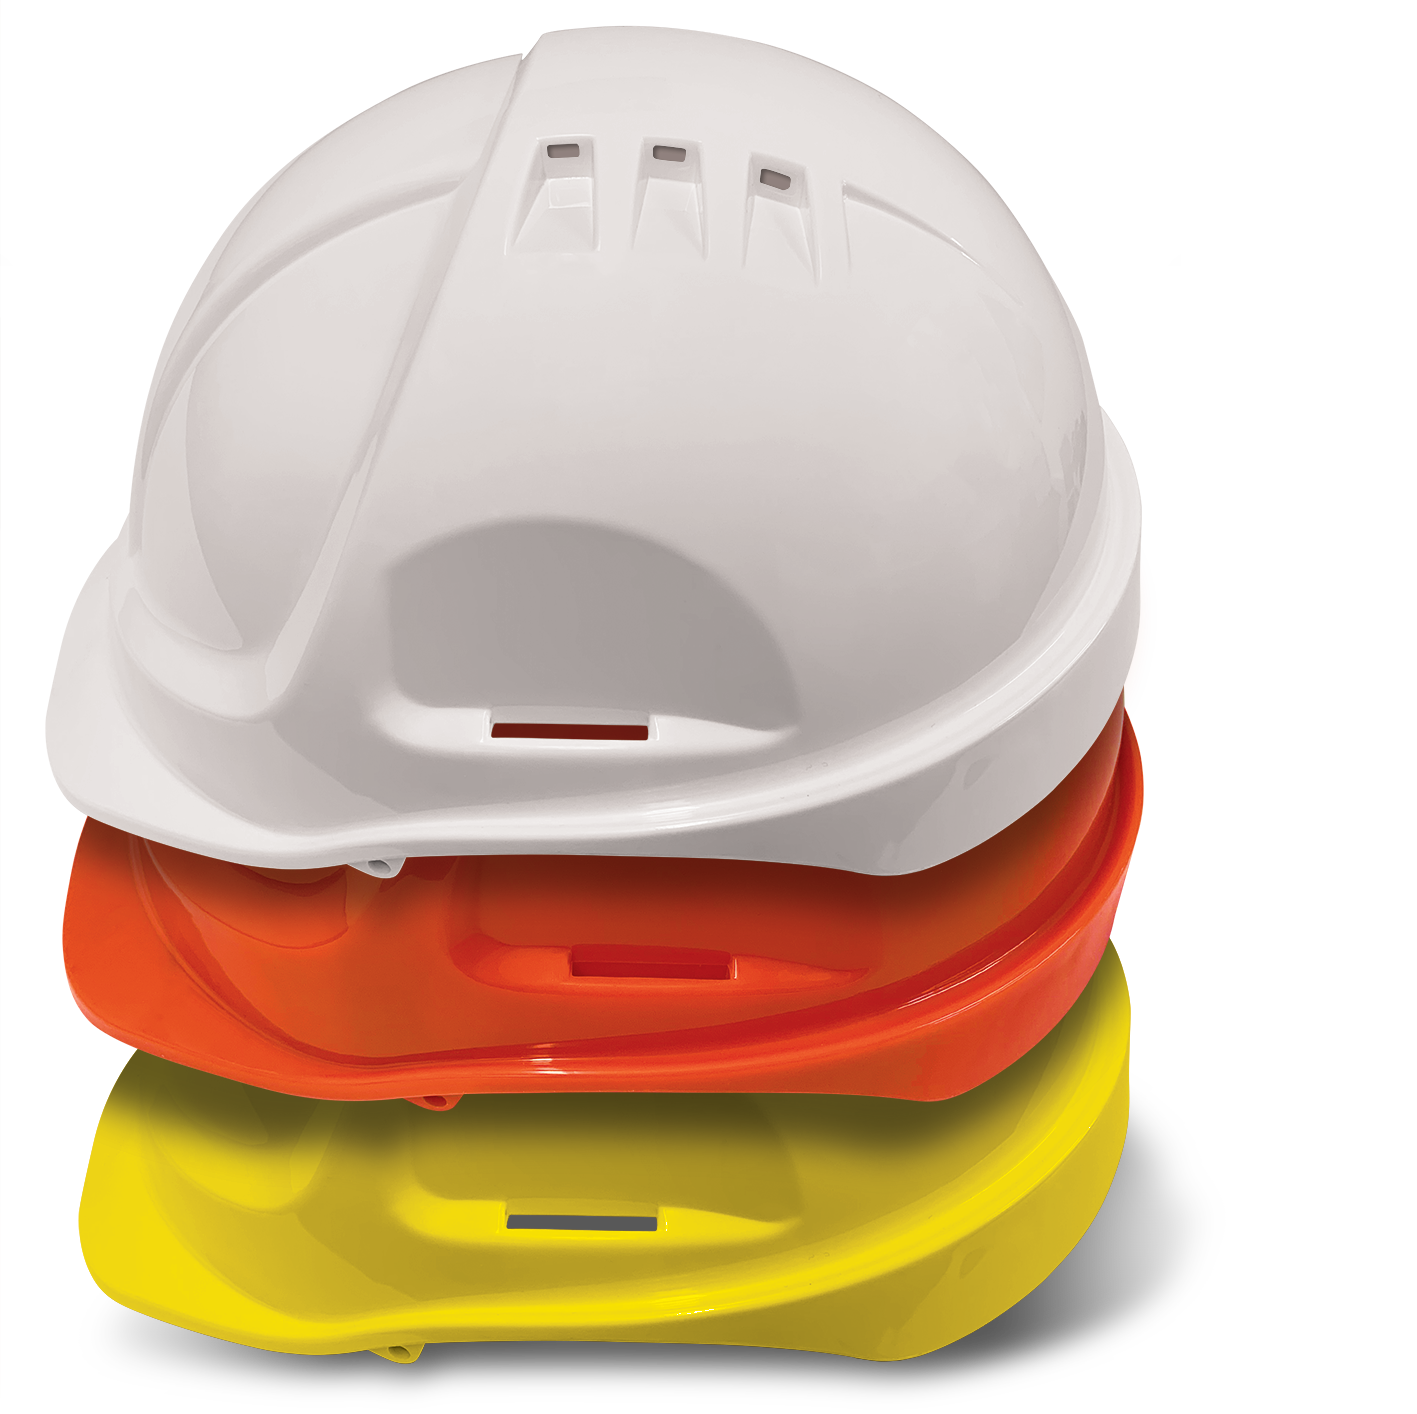 Armour Safety Products Ltd. - Armour ABS Hard Hat Vented